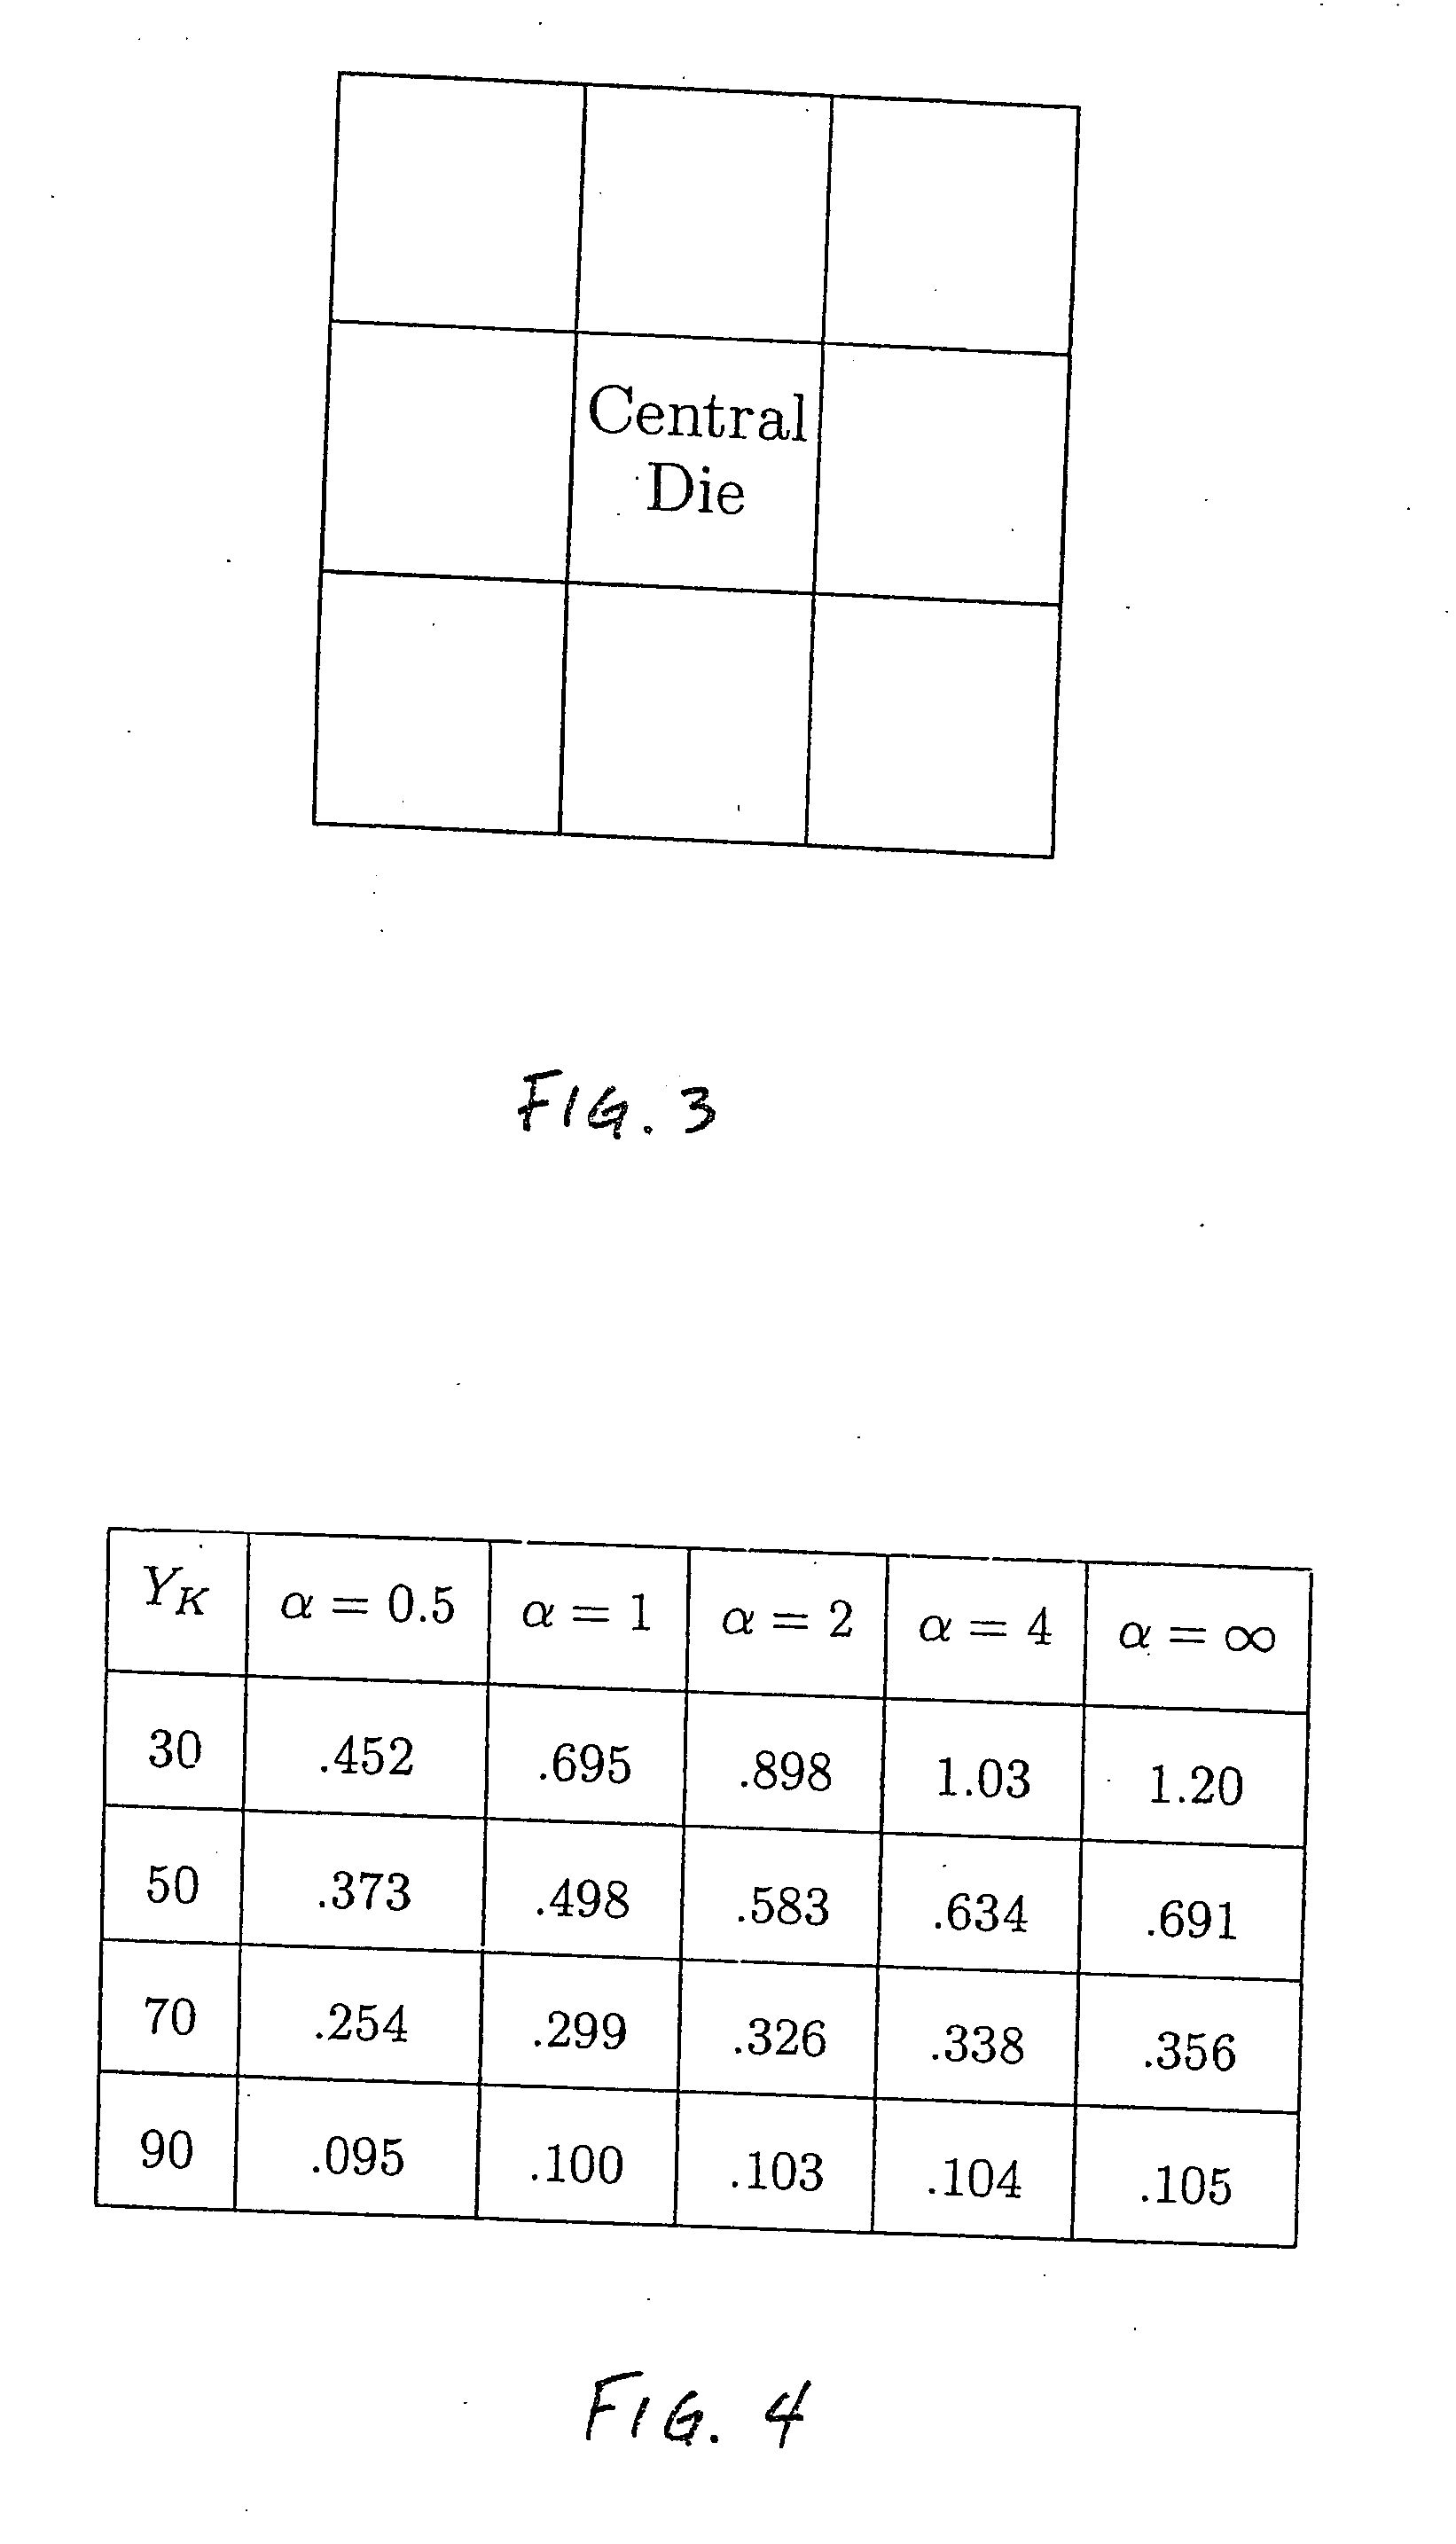 System and method for estimating reliability of components for testing and quality optimization